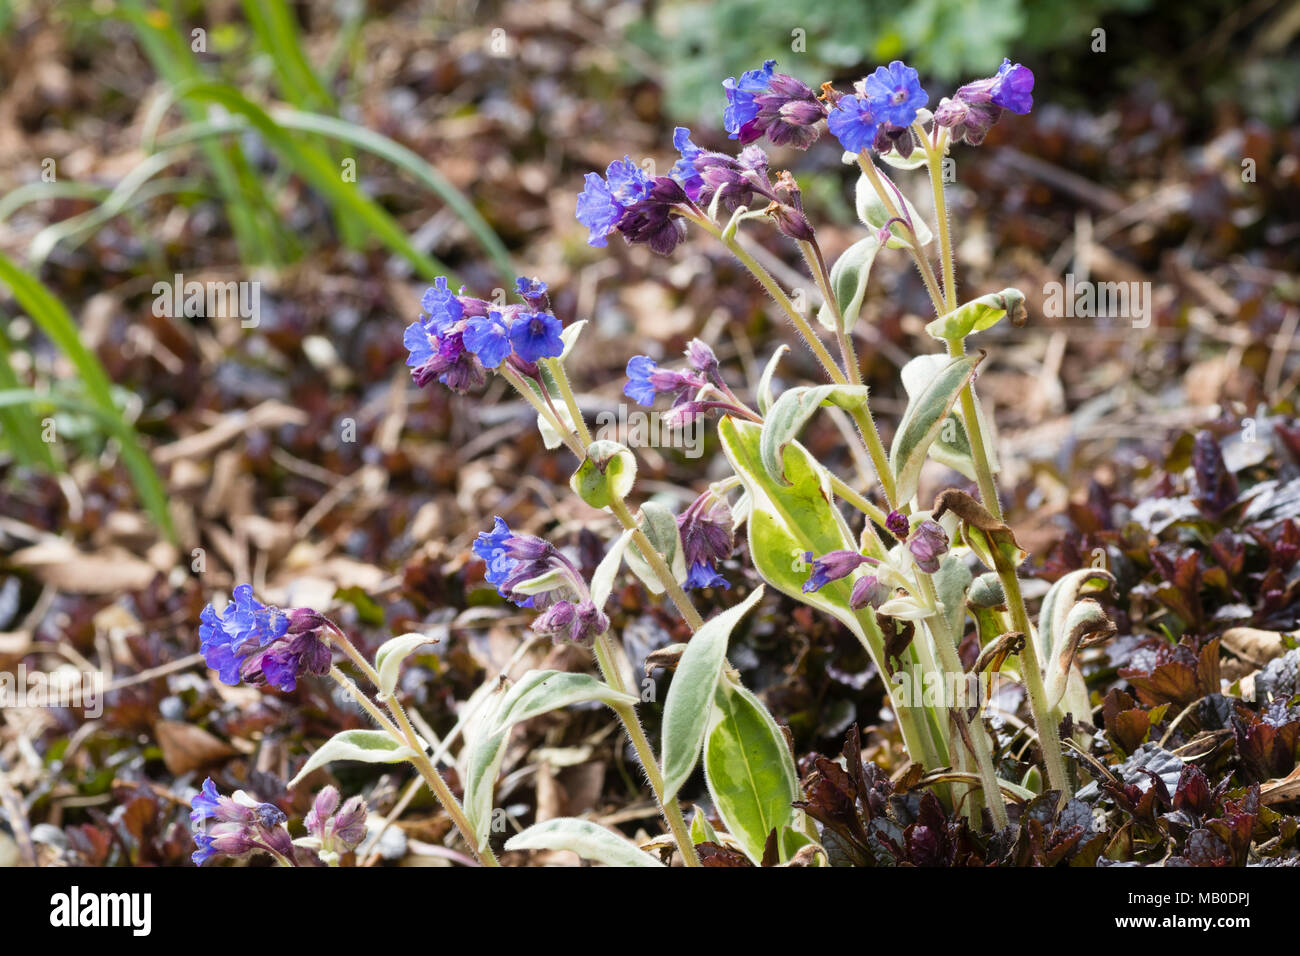 Cream and green variegated emerging foliage contrasts with the blue flowers of the hardy lungwort, 'Pulmonaria Open Skies' Stock Photo